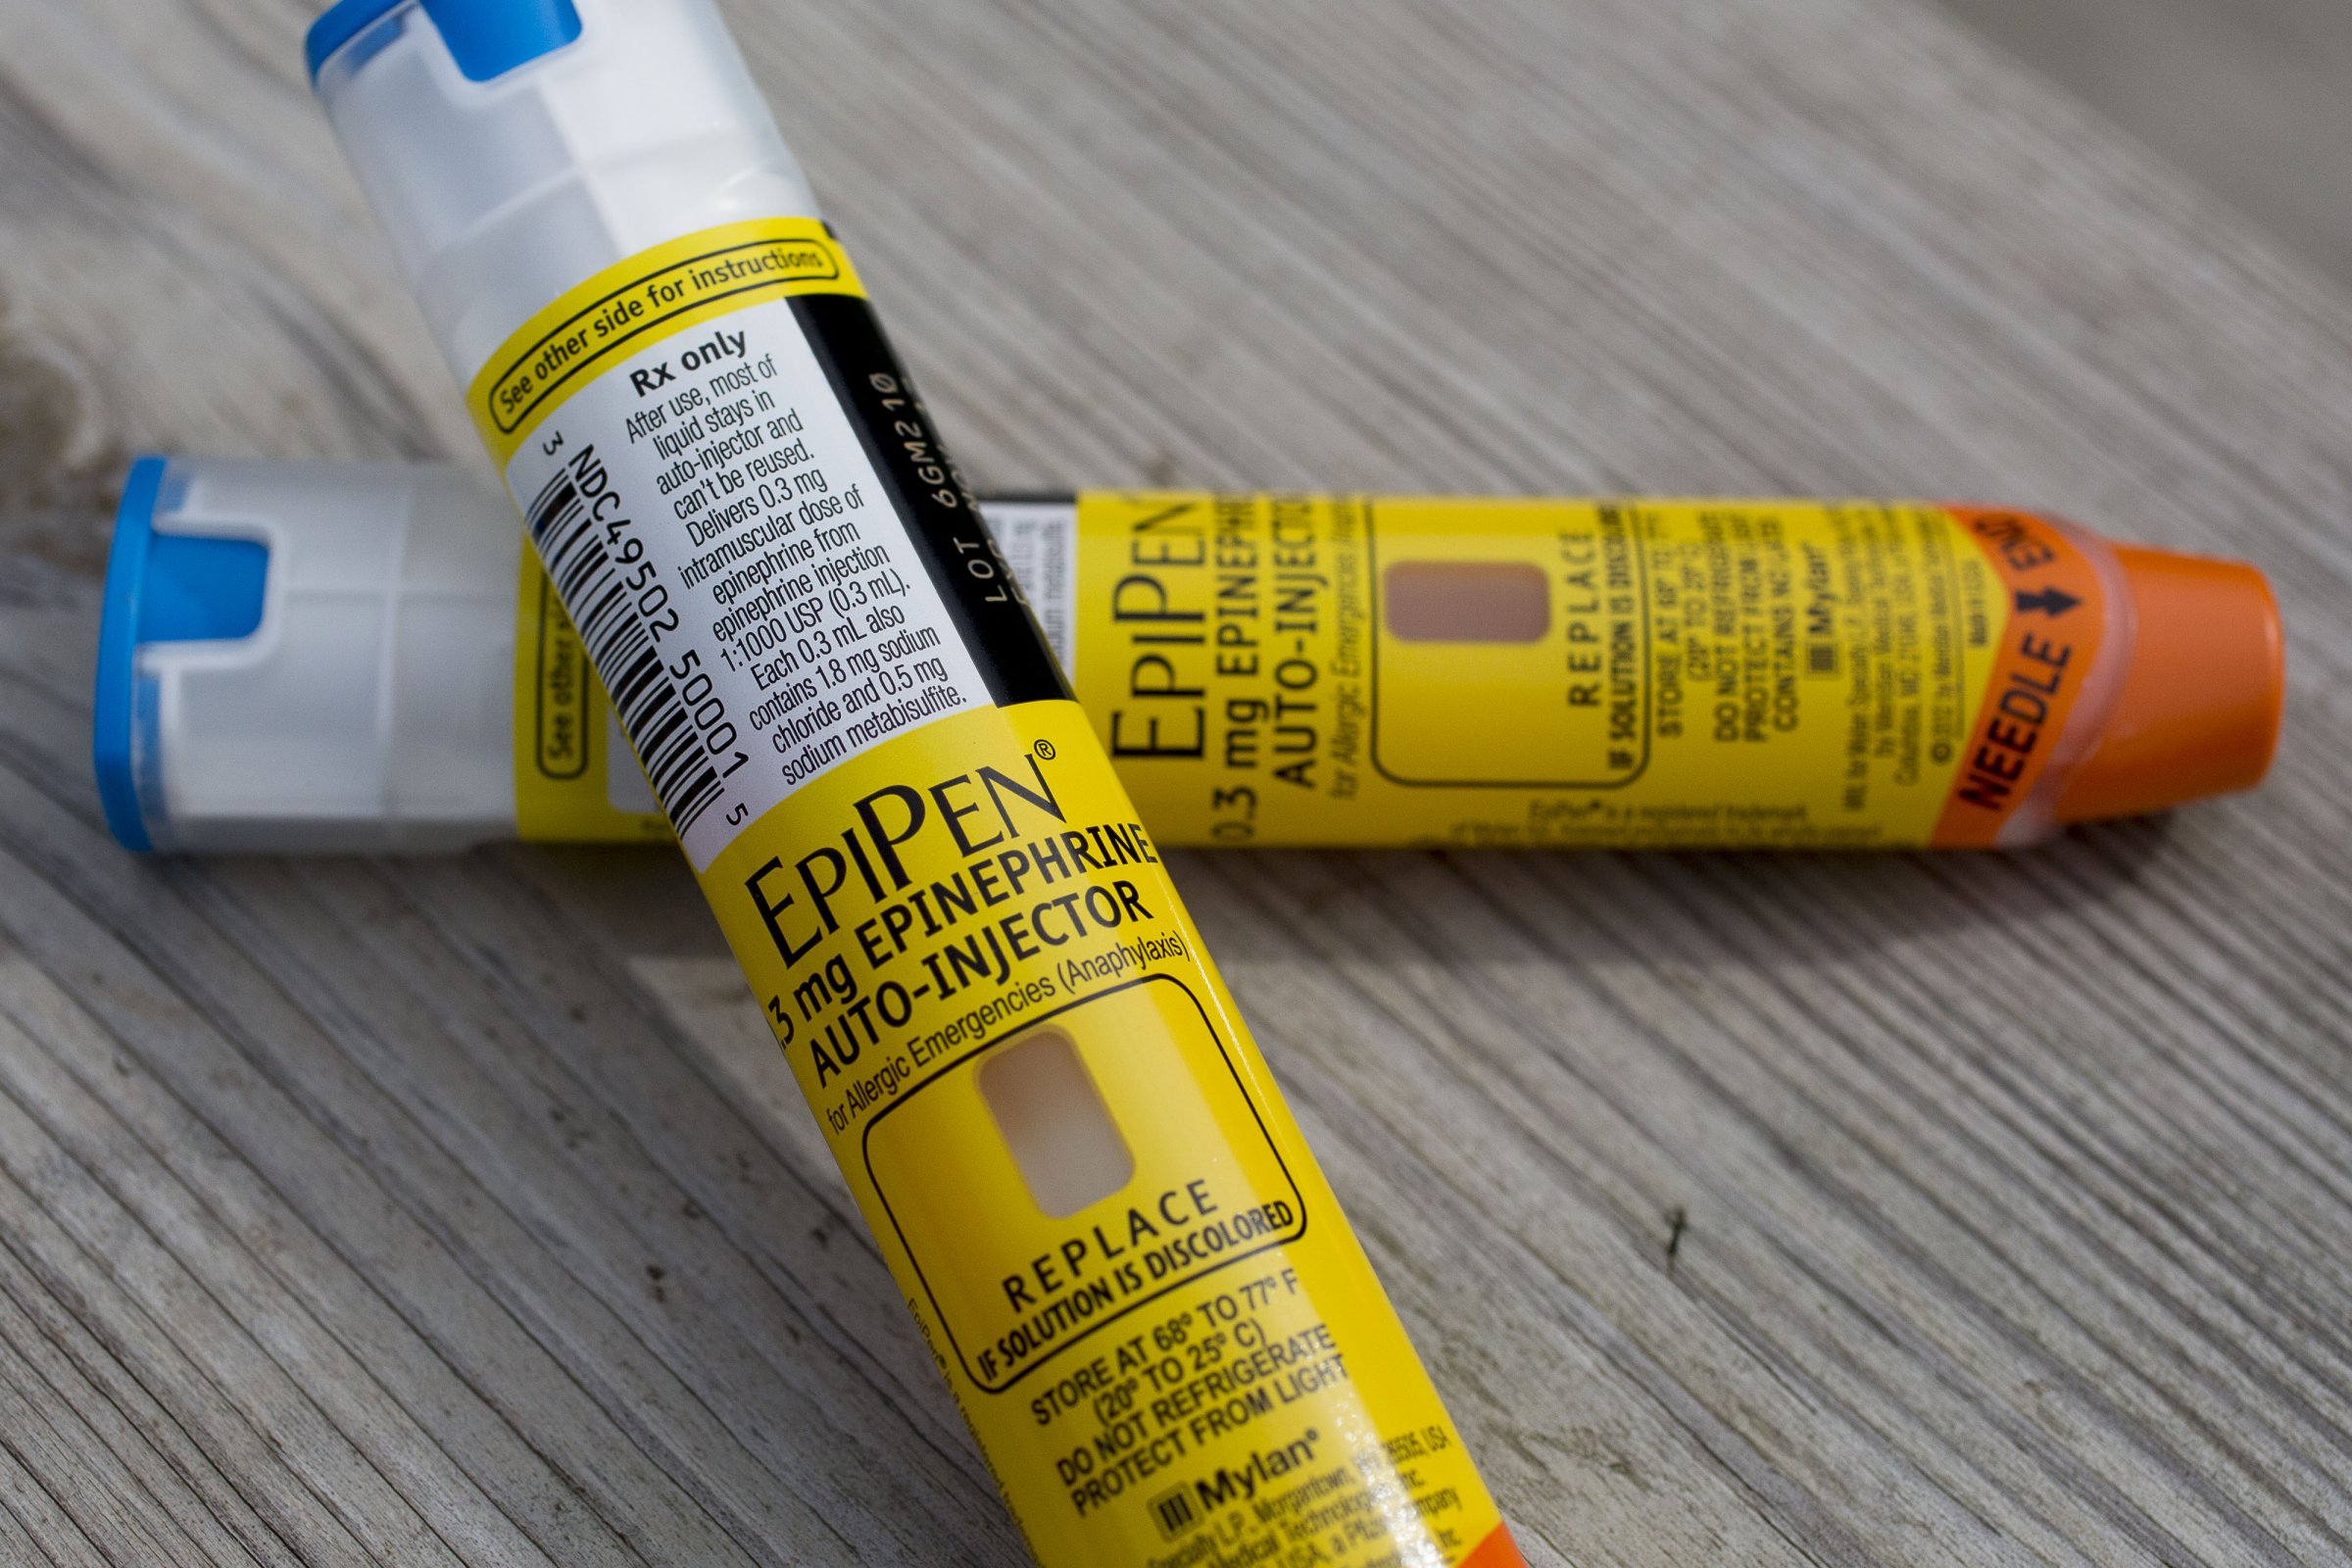 Mylan NVs EpiPen Product Illustrations As Company's Move to Curb EpiPen Costs Blasted as PR Fix by Congress